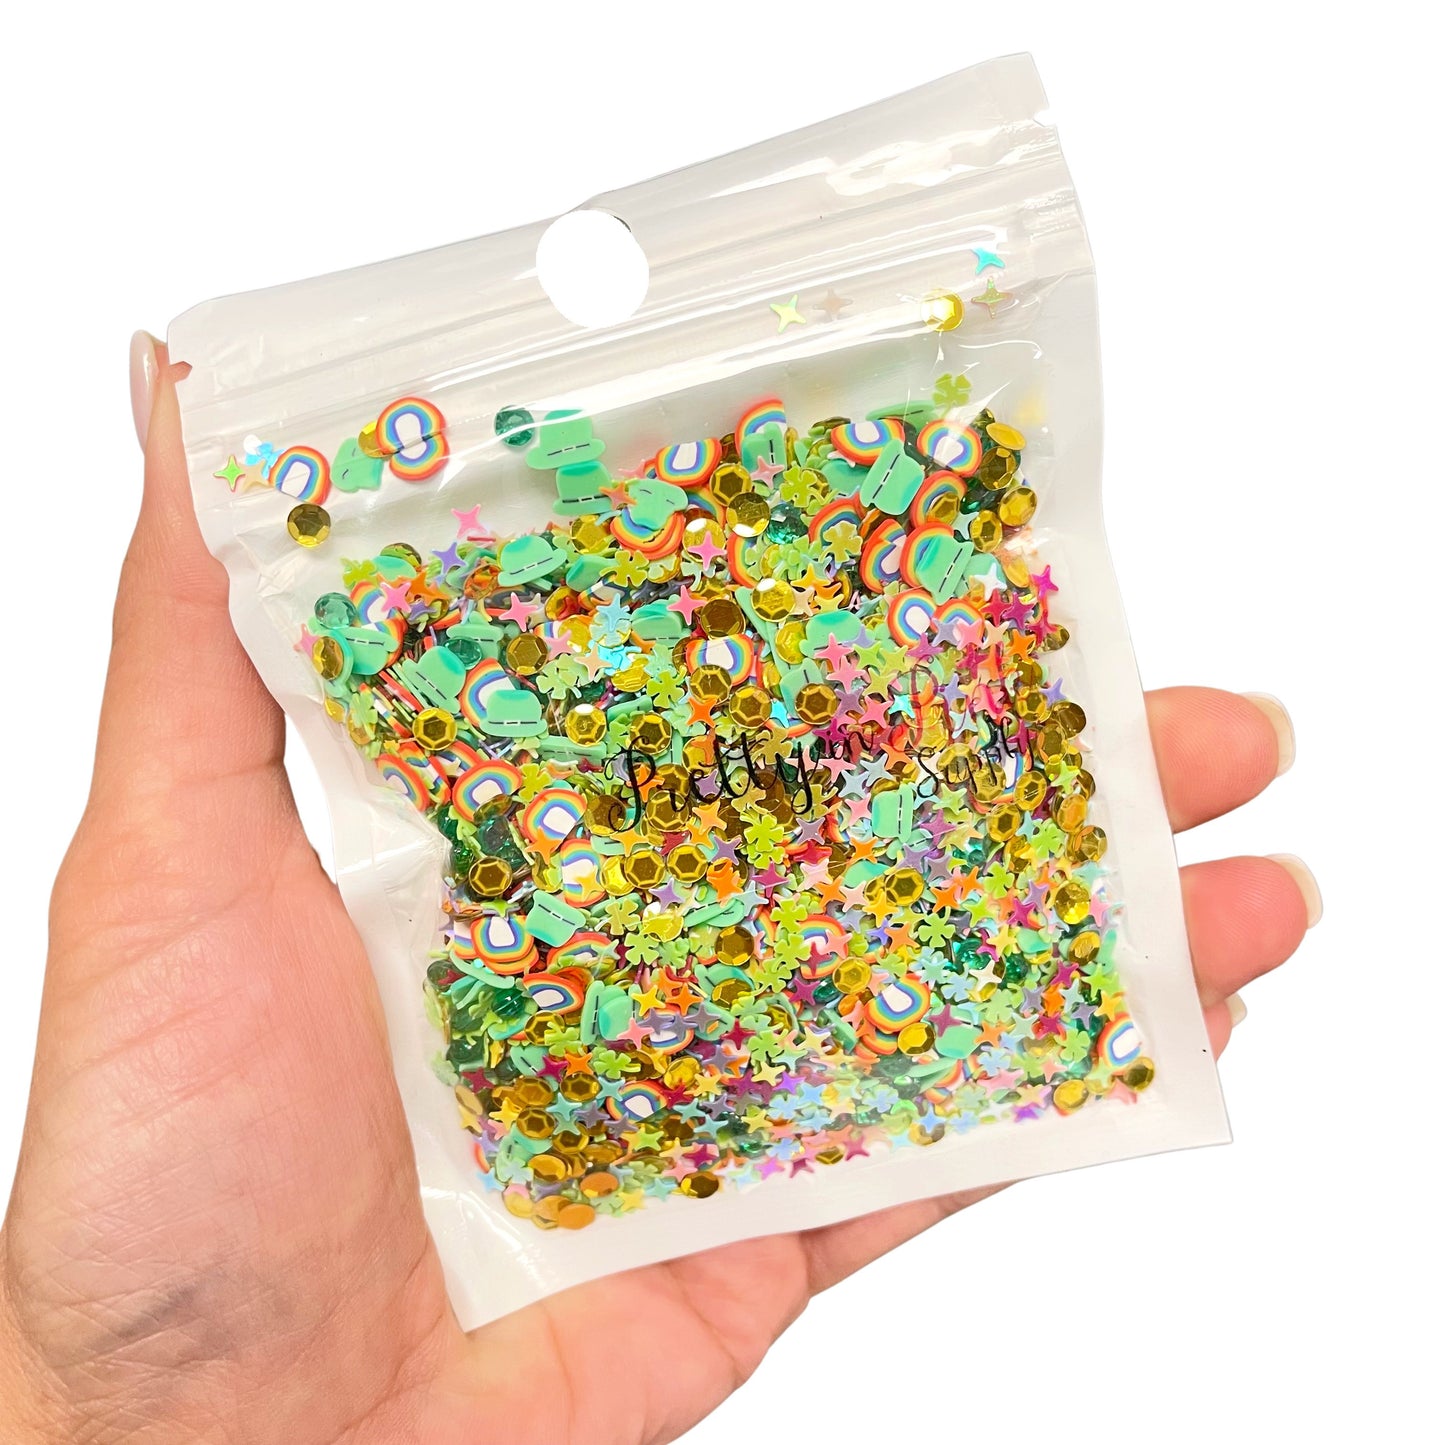 Resealable bag of St. Patrick's Day clay and sequin mix including rainbow clay slices, green shamrock clay slices, aqua gems, gold coins sequin glitter, and pastel rainbow sequin glitter.